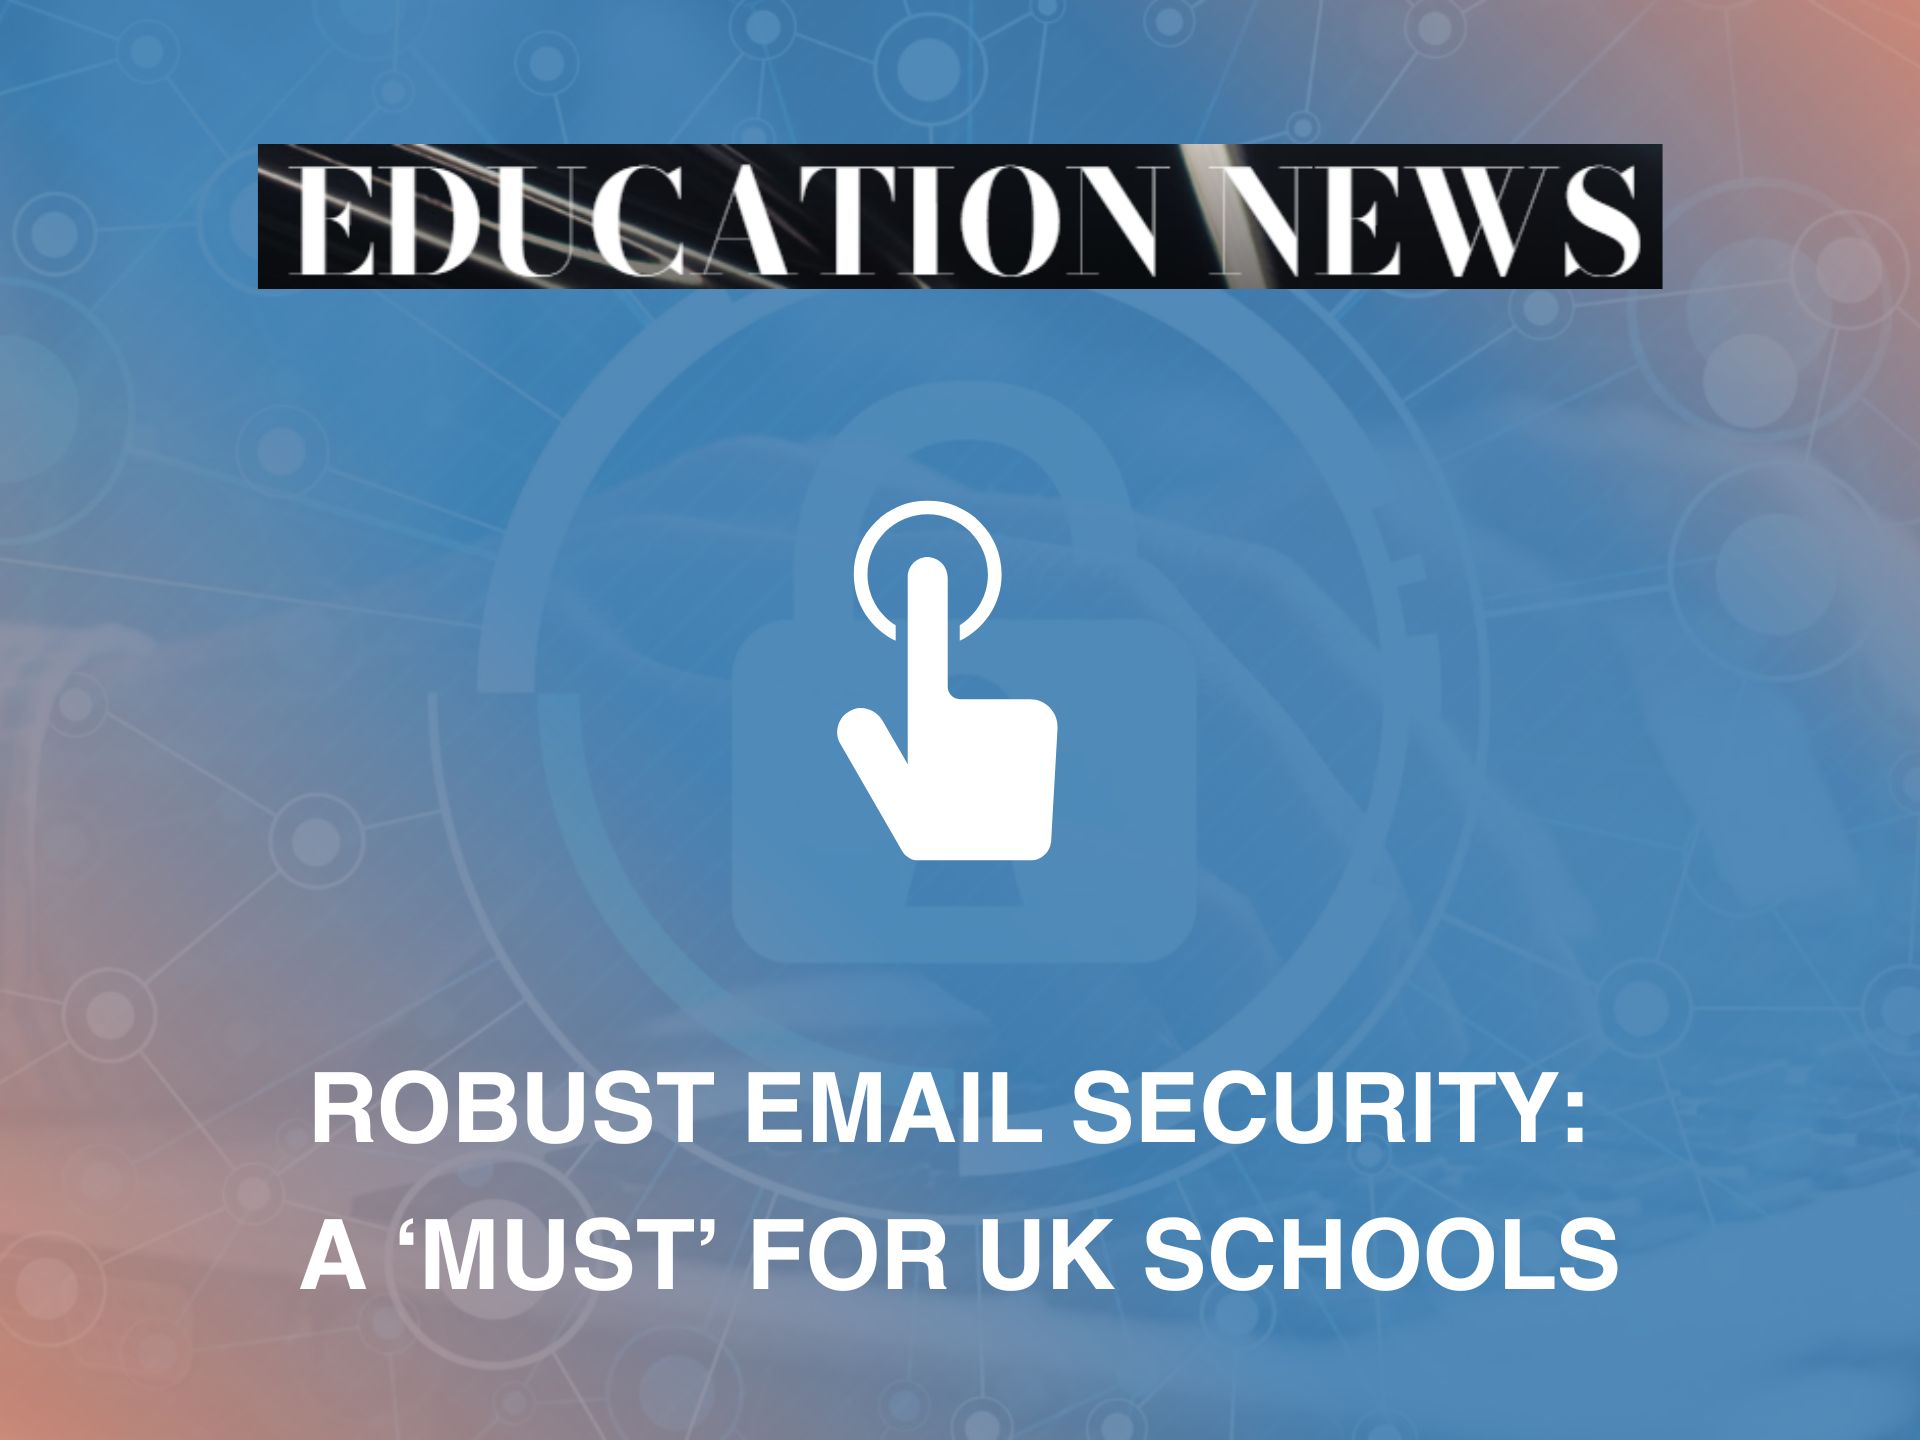 press releases- education news uk